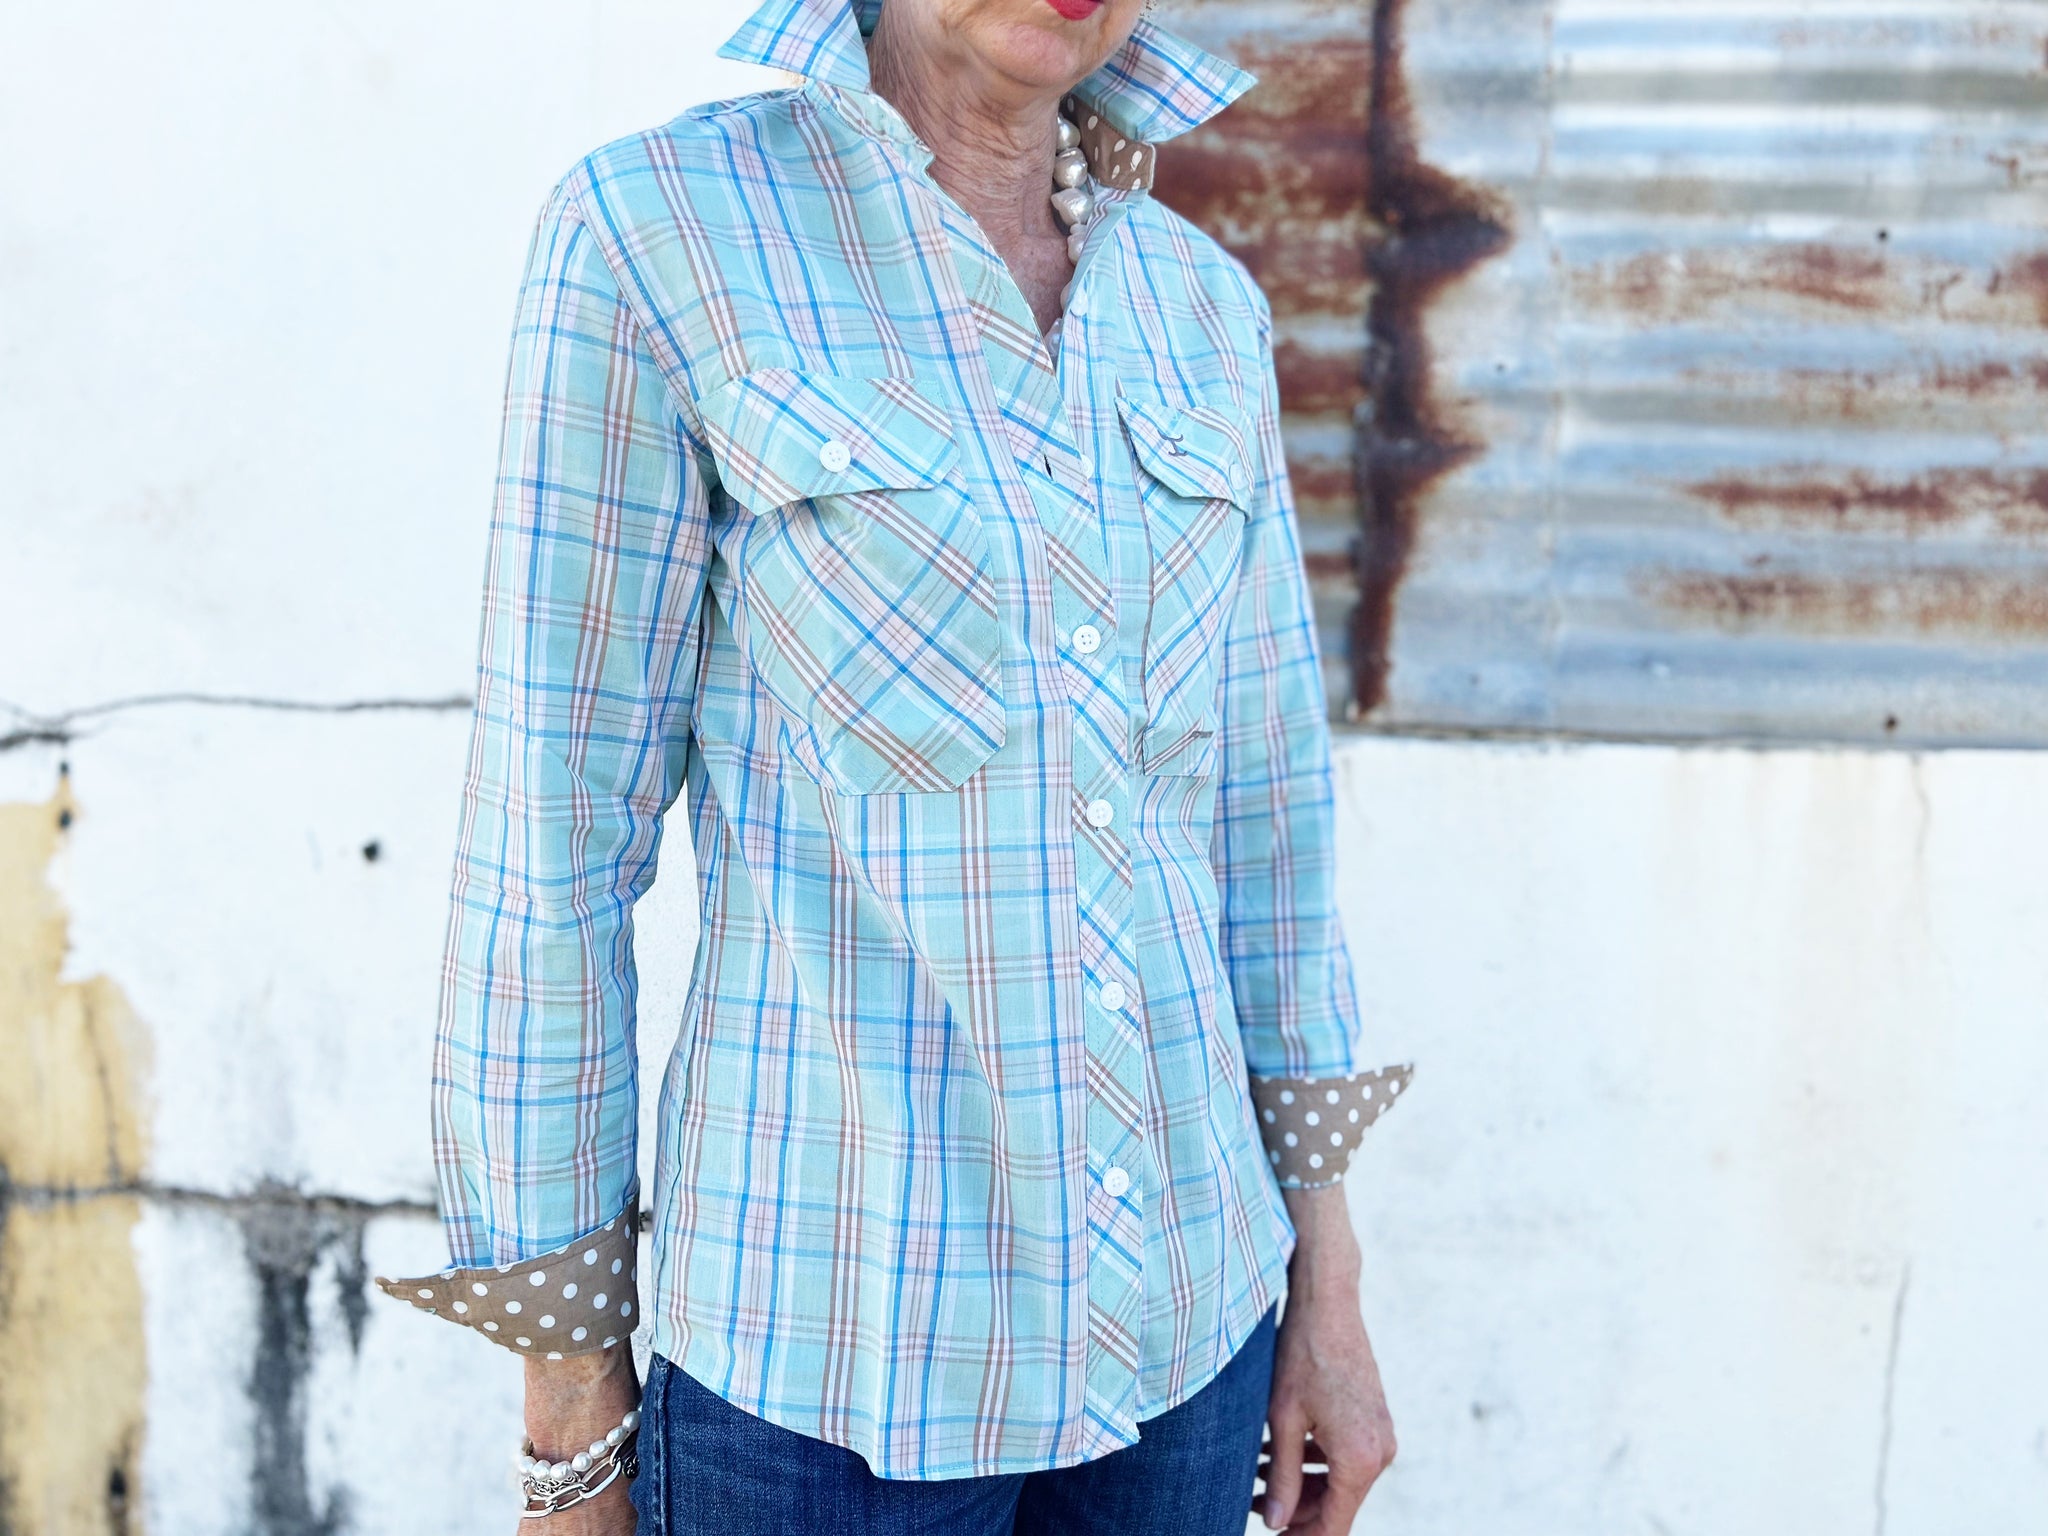 WWLS2242 Just Country Ladies Abbey Full Button Print Workshirt Spearmint Plaid